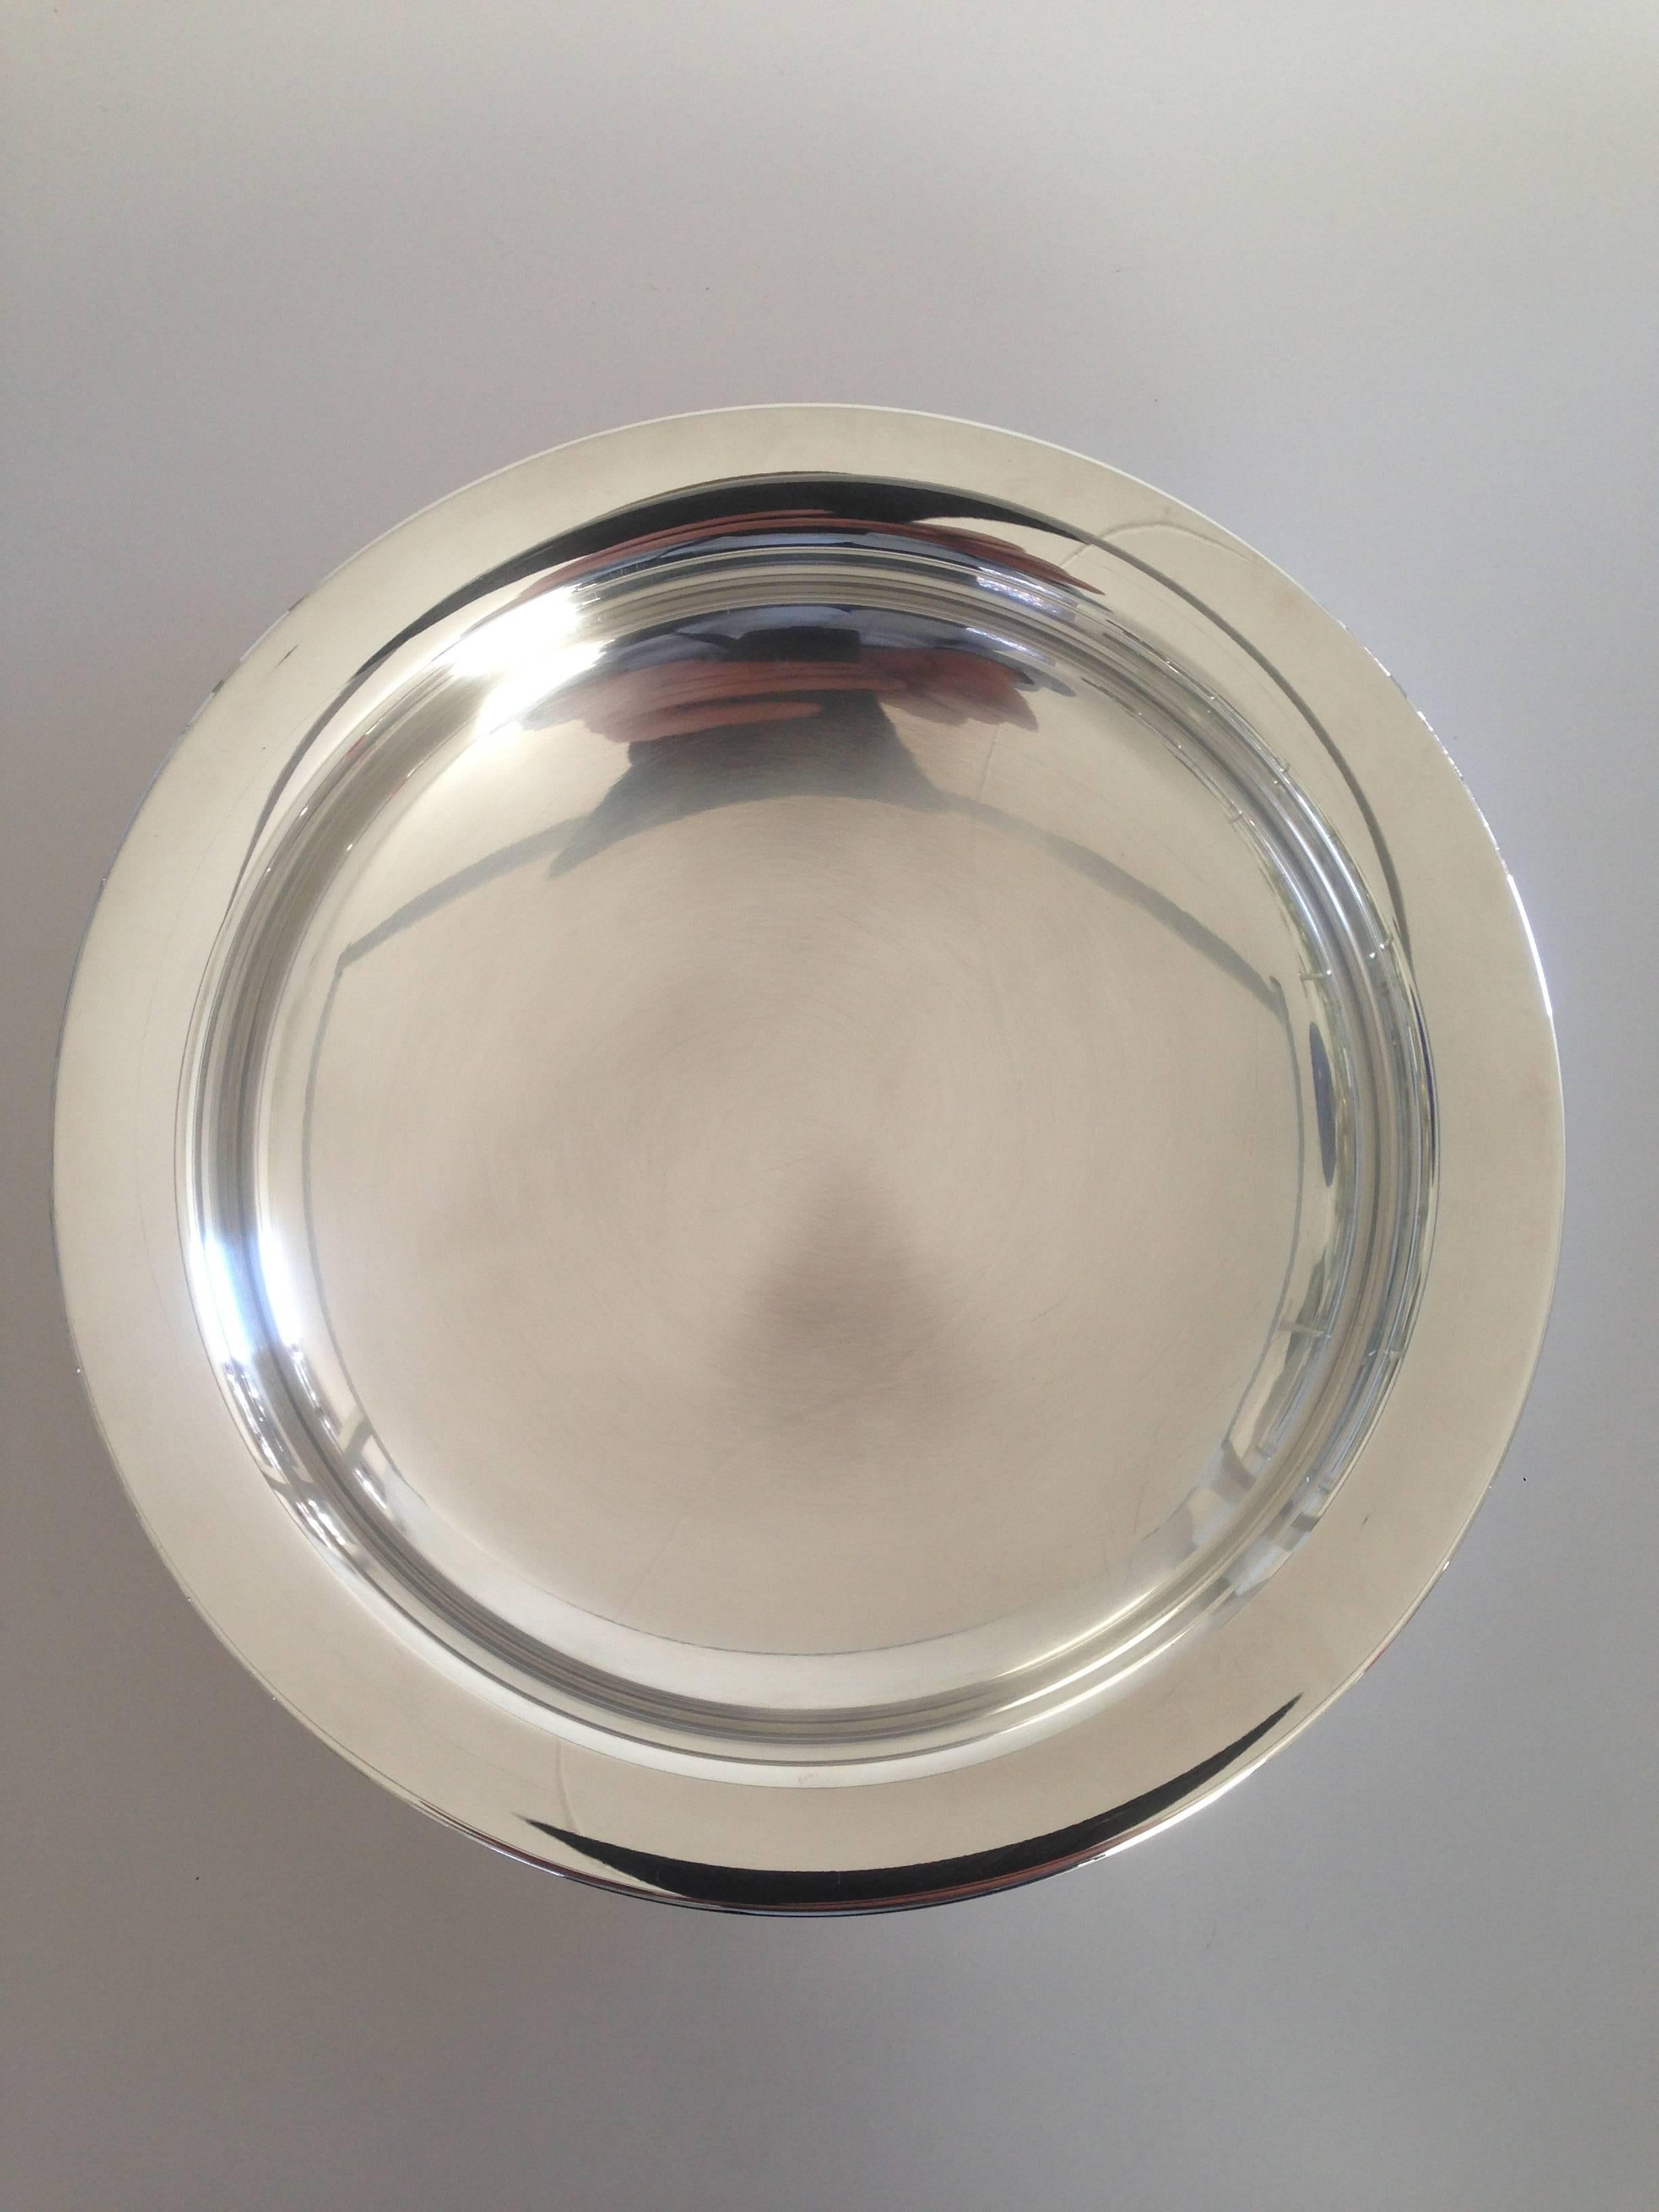 Georg Jensen sterling silver bowl designed by Alev Siesbye #1292.

Is from 1989.

Measures 32.5cm / 12 4/5